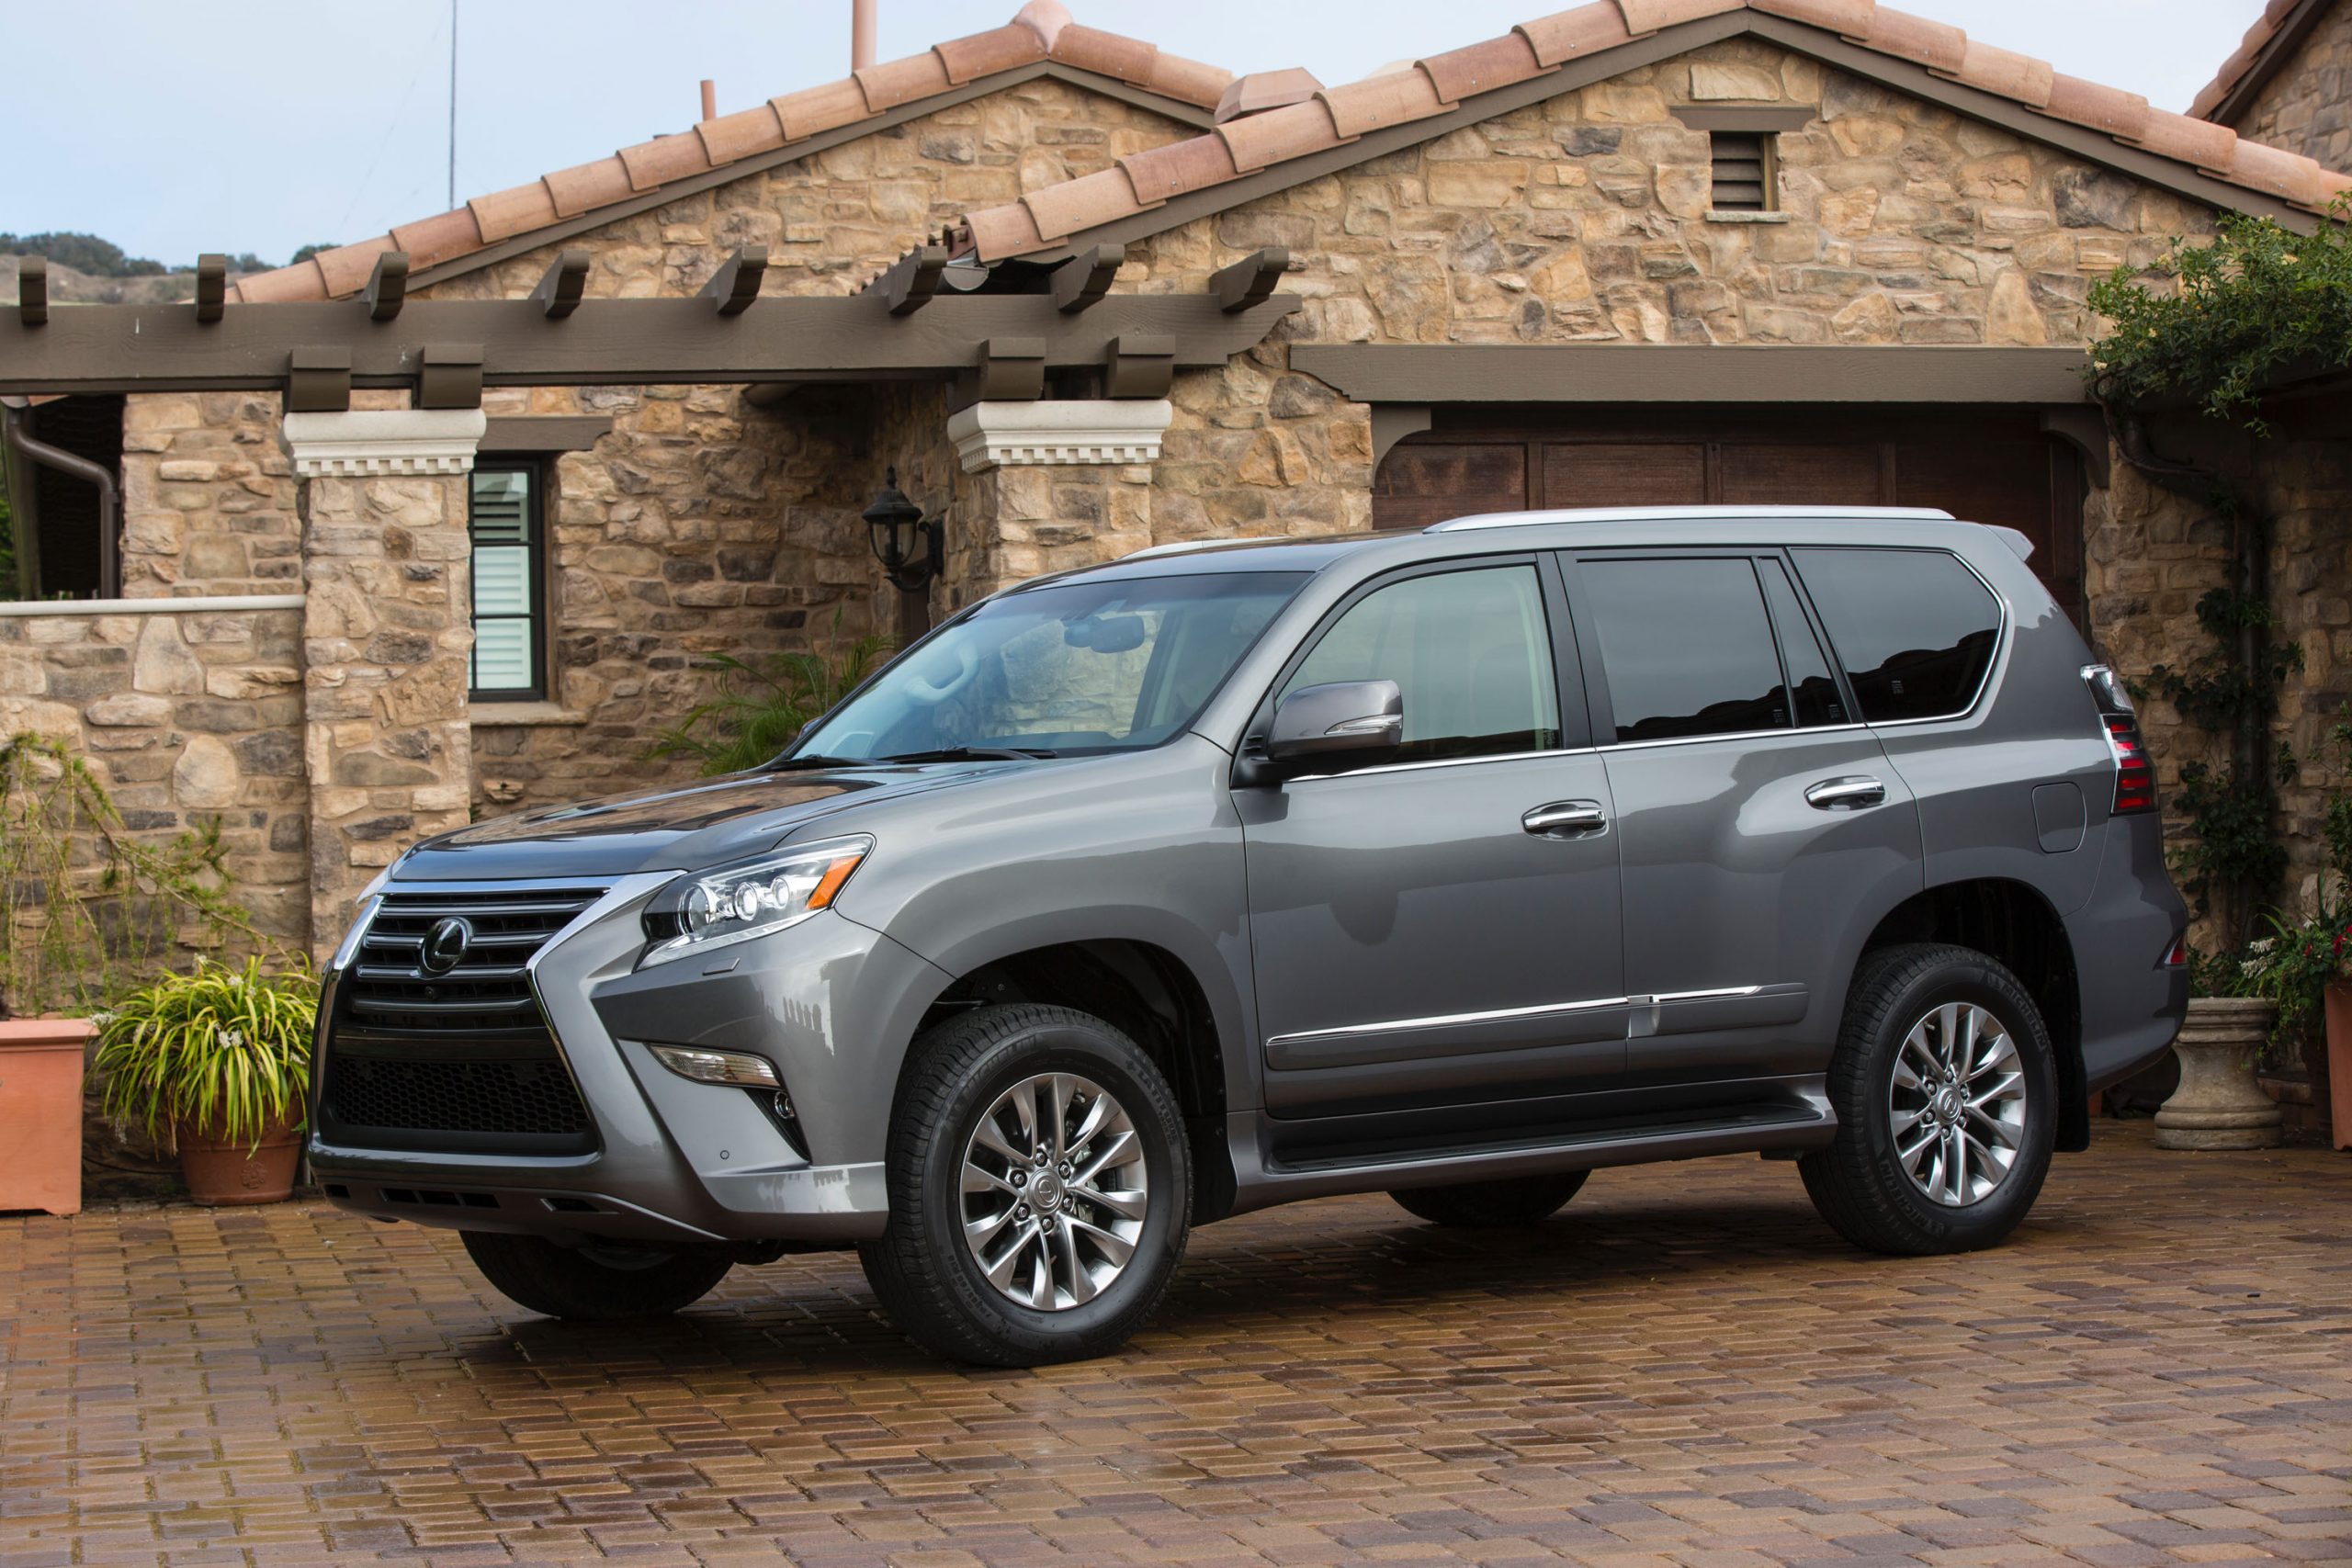 The 2017 Lexus GX 460 parked in front of a home